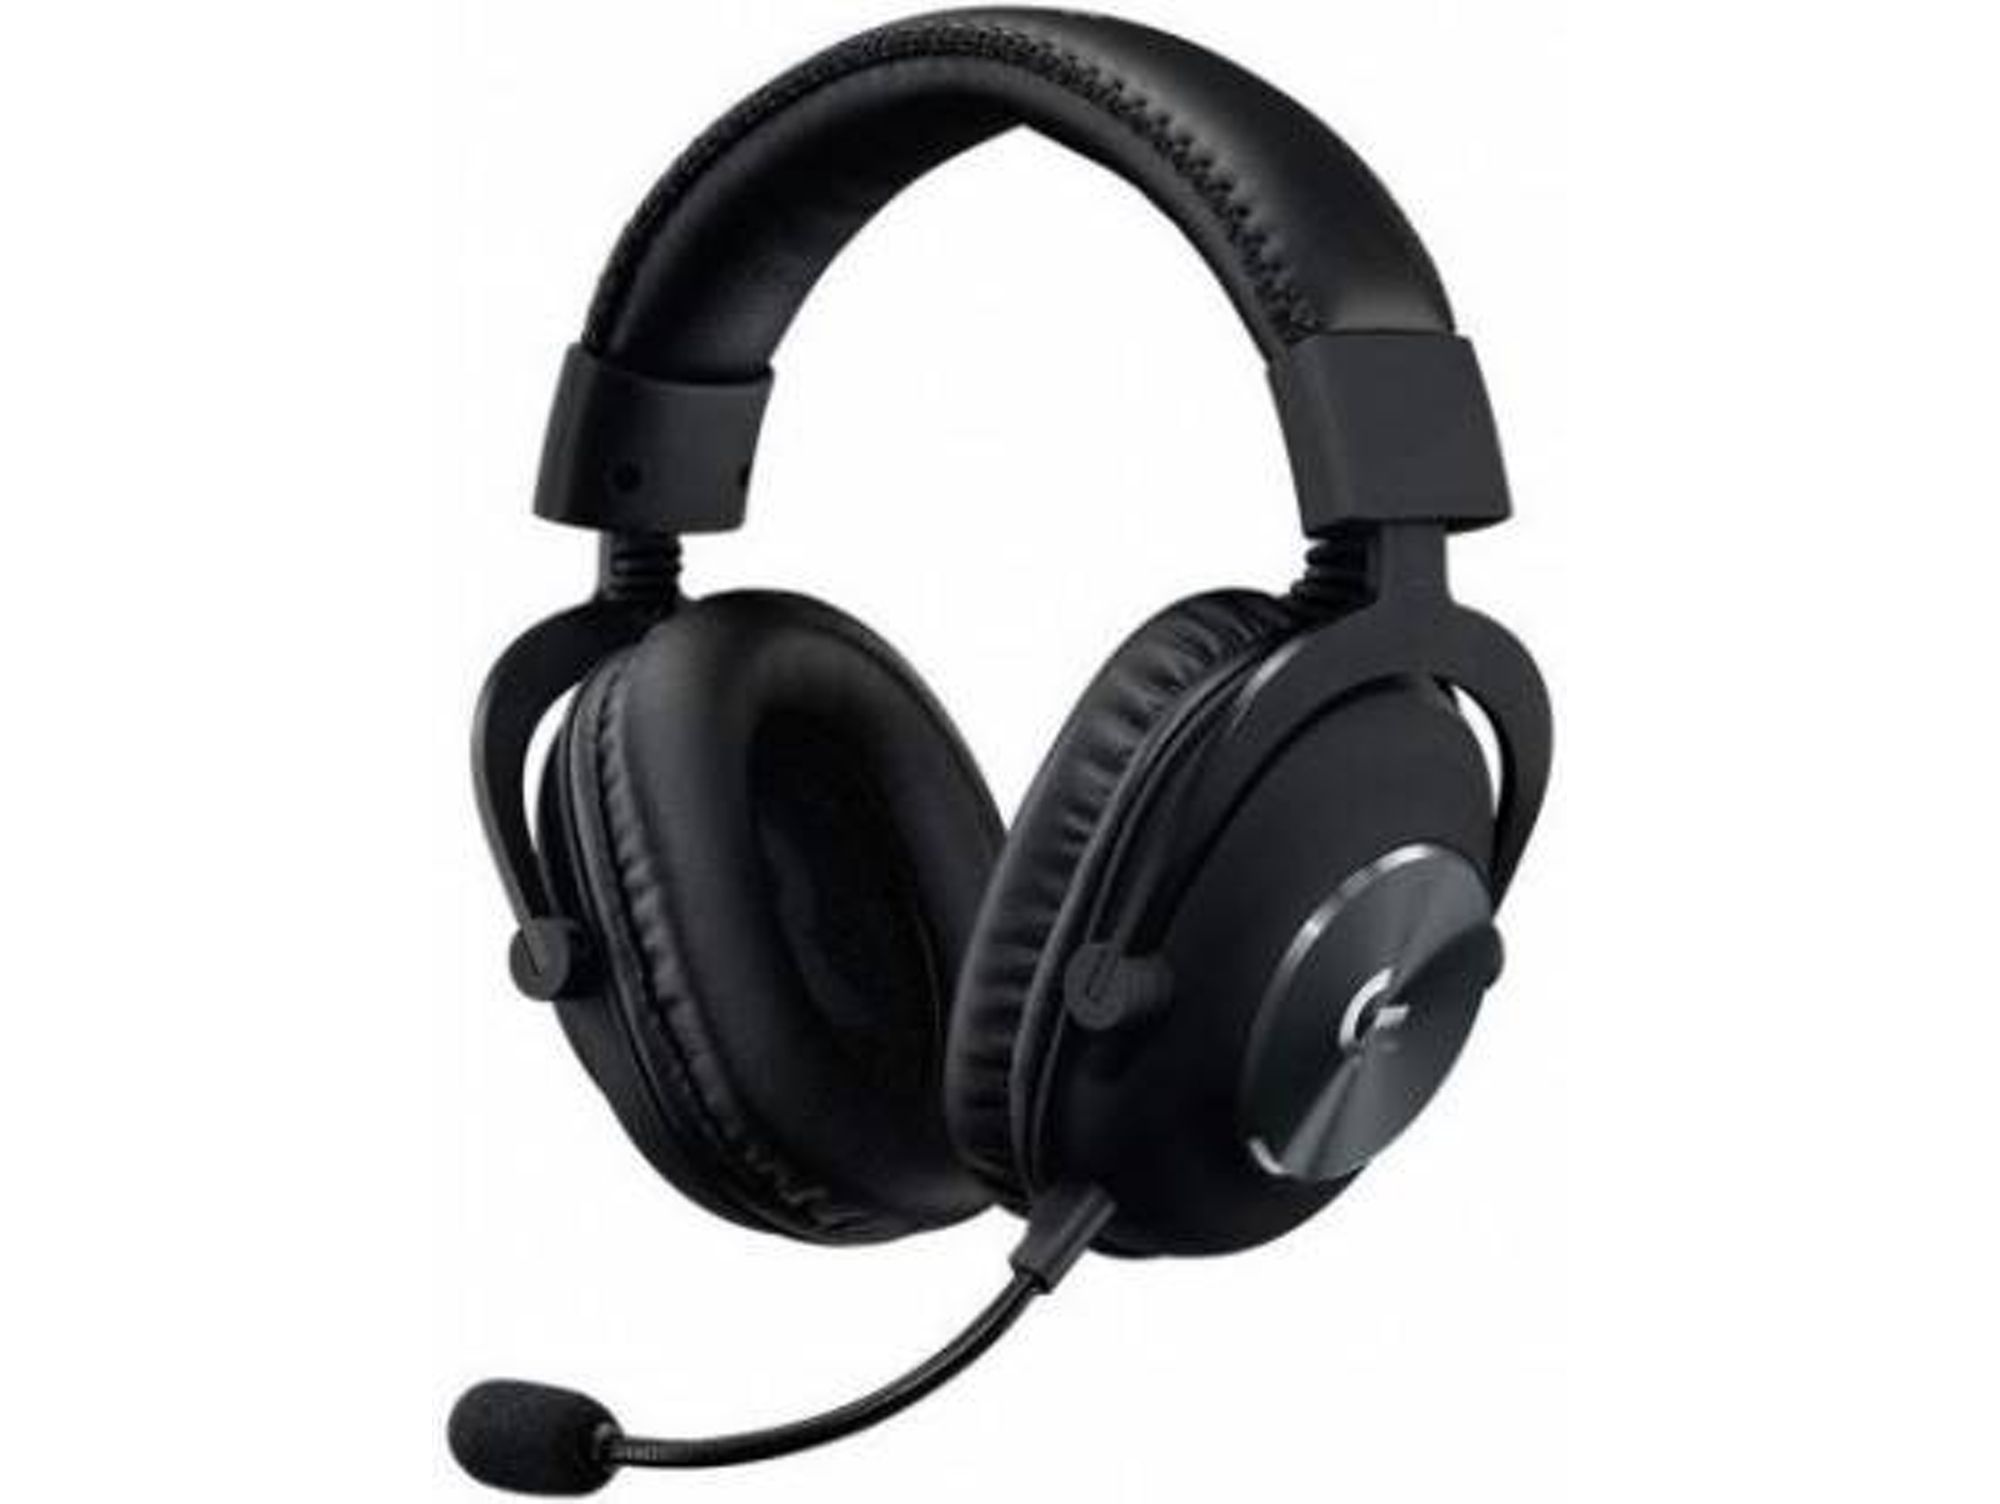 Logitech Auriculares Gaming cable y blue voce dts headphonex 7.1 controladores prog 50mm sonido surround para esports pcpsxboxnintendo switch negro over ear multiplataforma jackusb pcps4ps5xboxswitchmovil diadema binaural headset 3.5